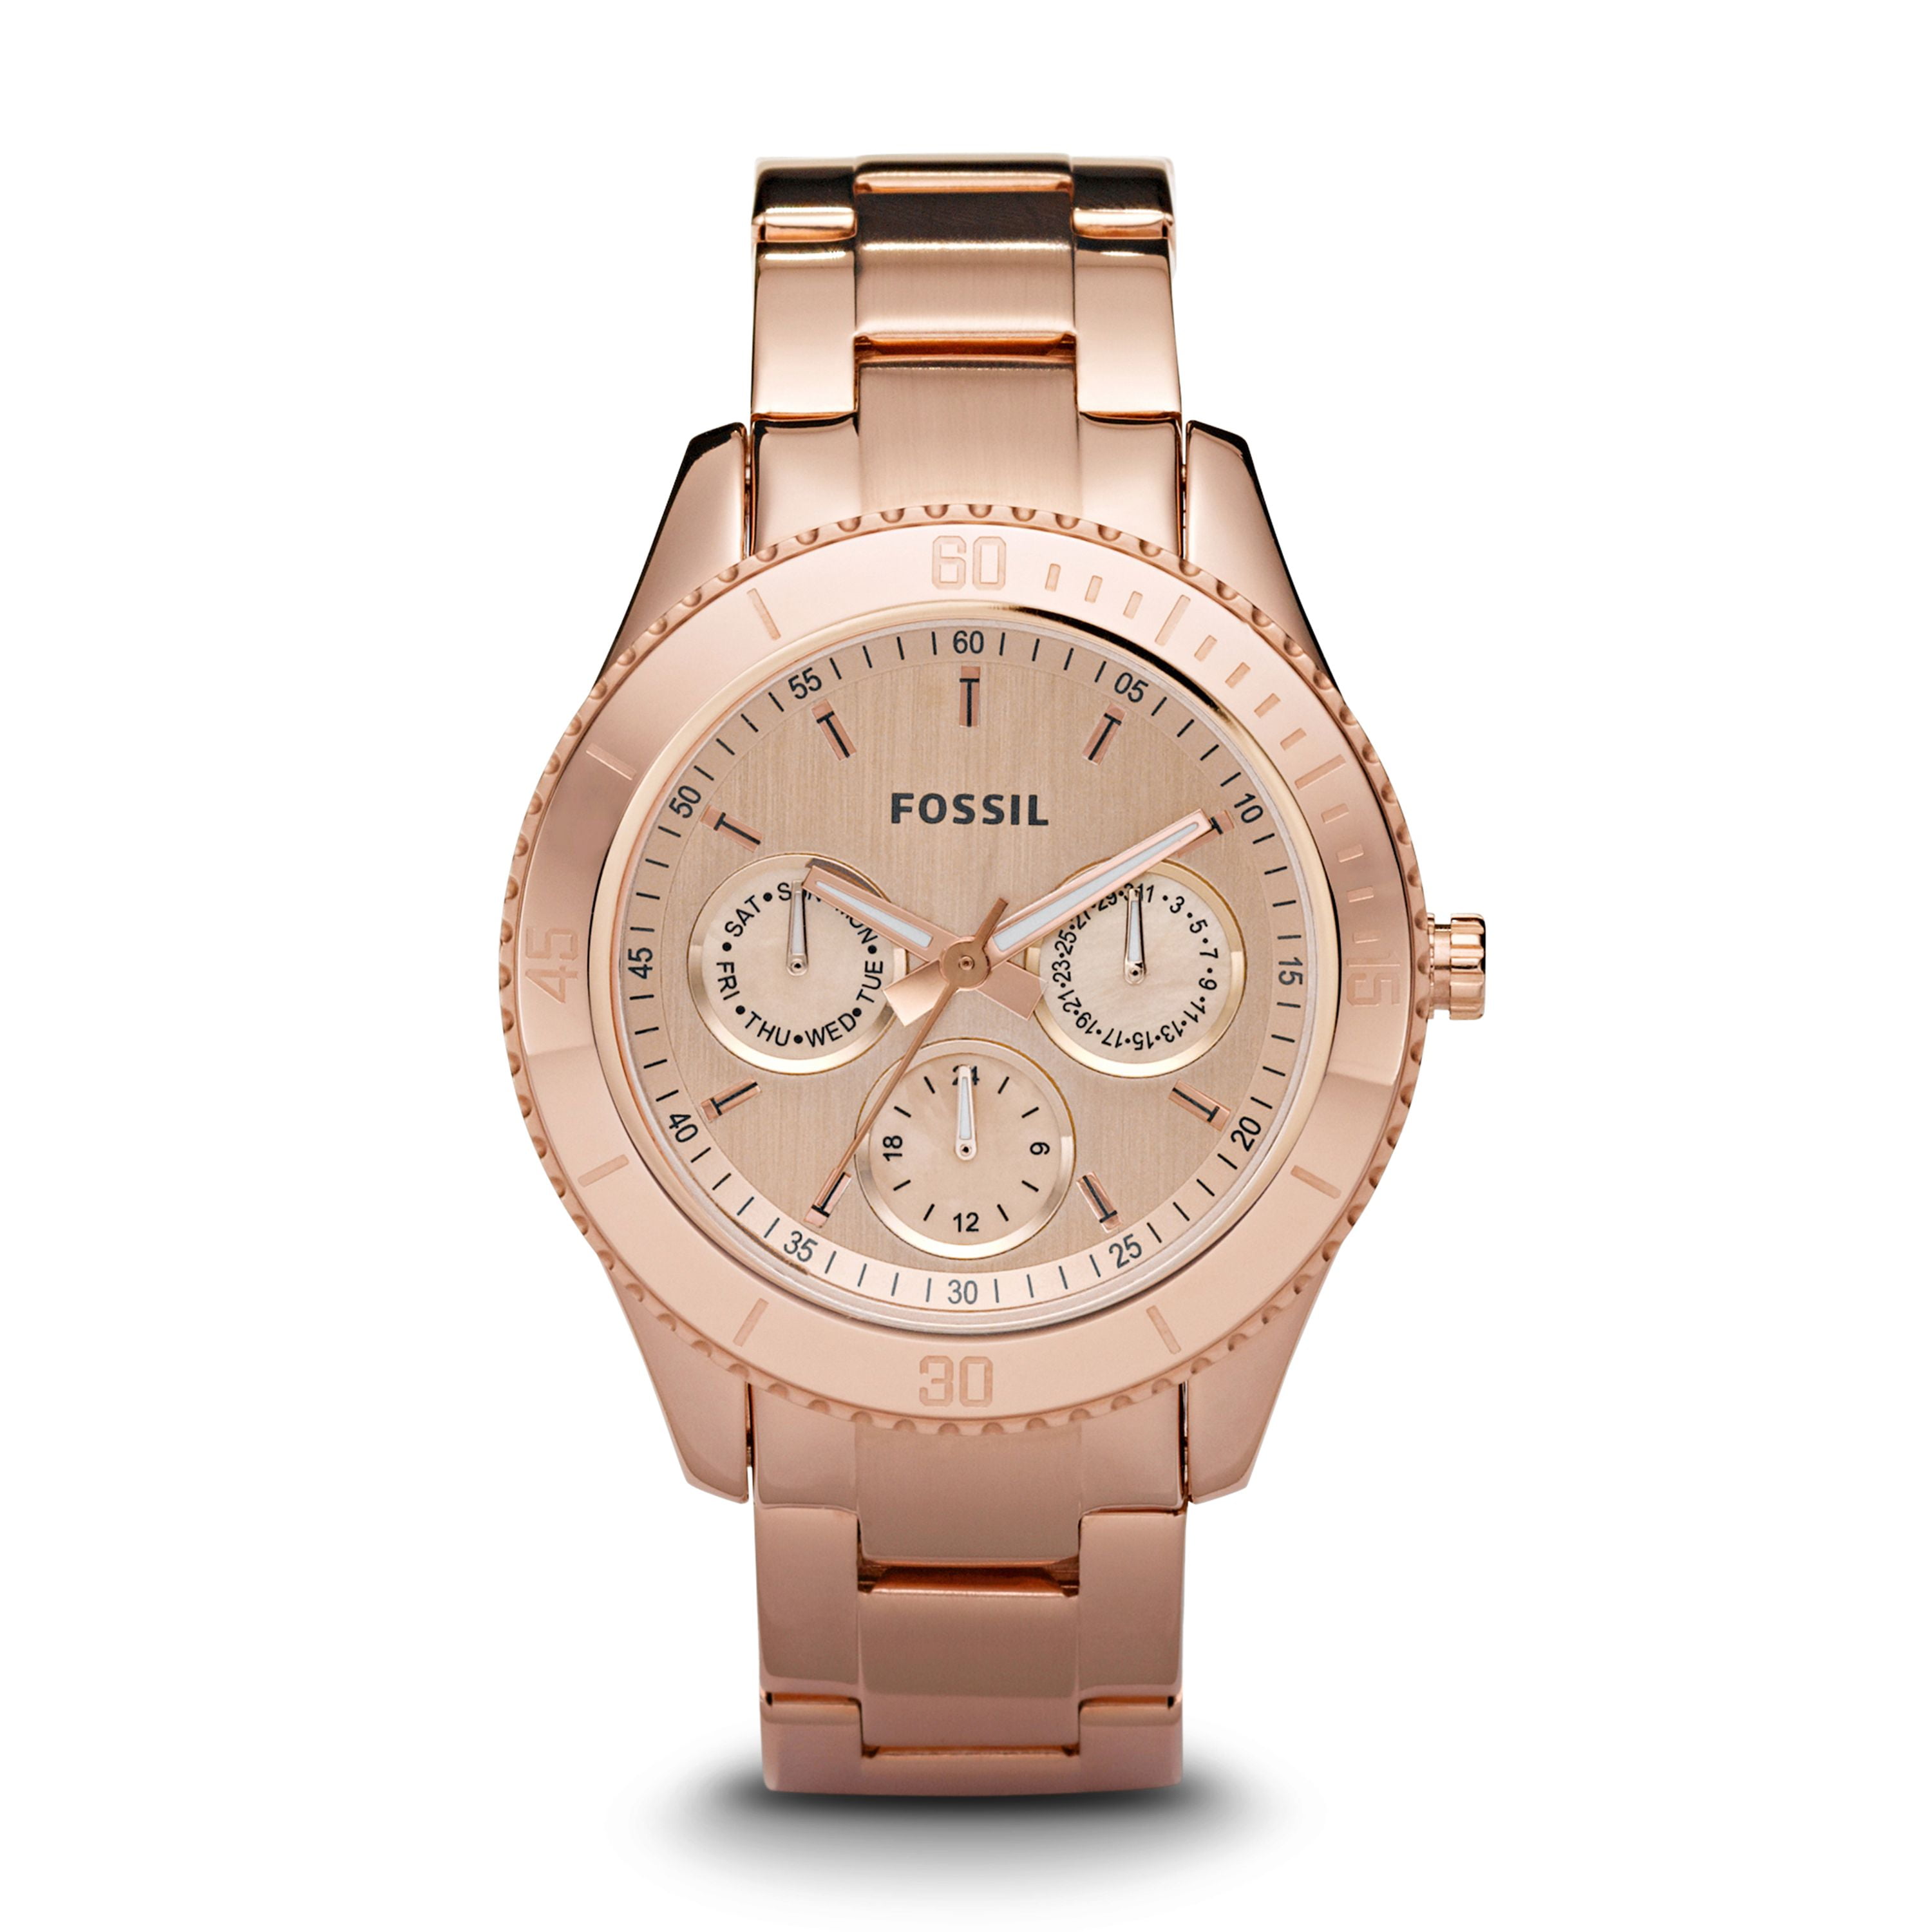 Fossil - Fossil Women's Stella Rose Gold Tone Stainless Steel Watch All Stainless Steel Fossil Watch